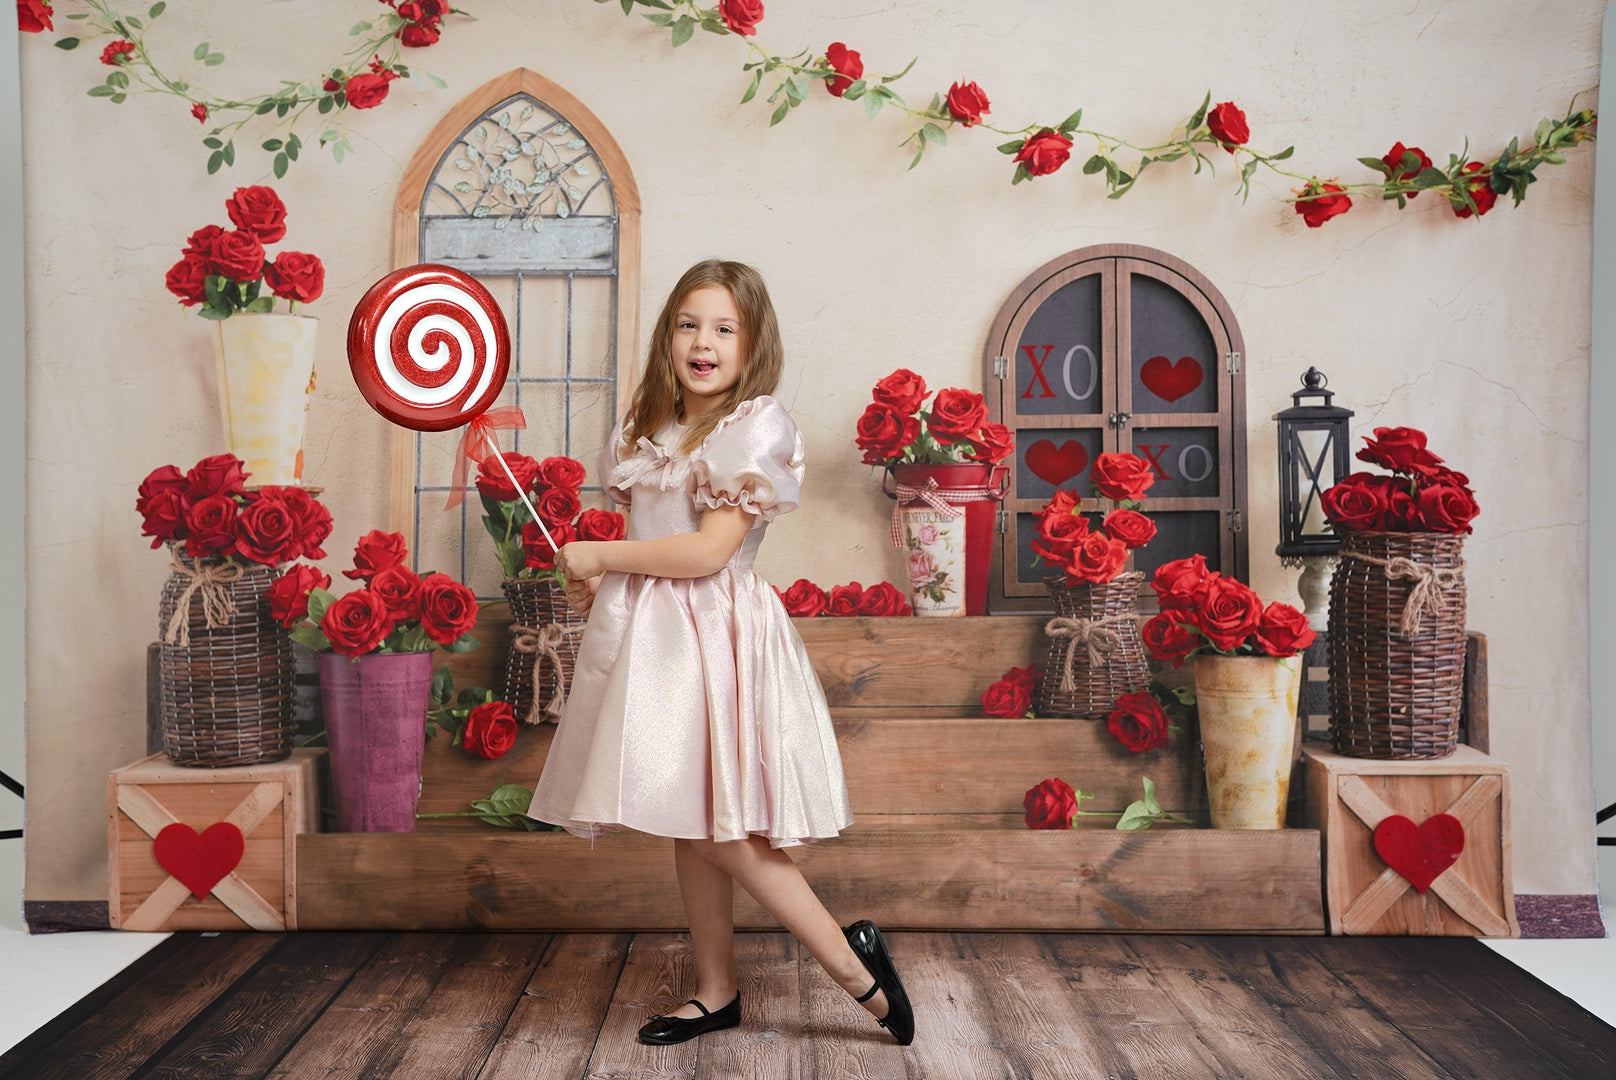 Kate Romantic Valentine's Day Backdrop Rose Steps Designed by Emetselch